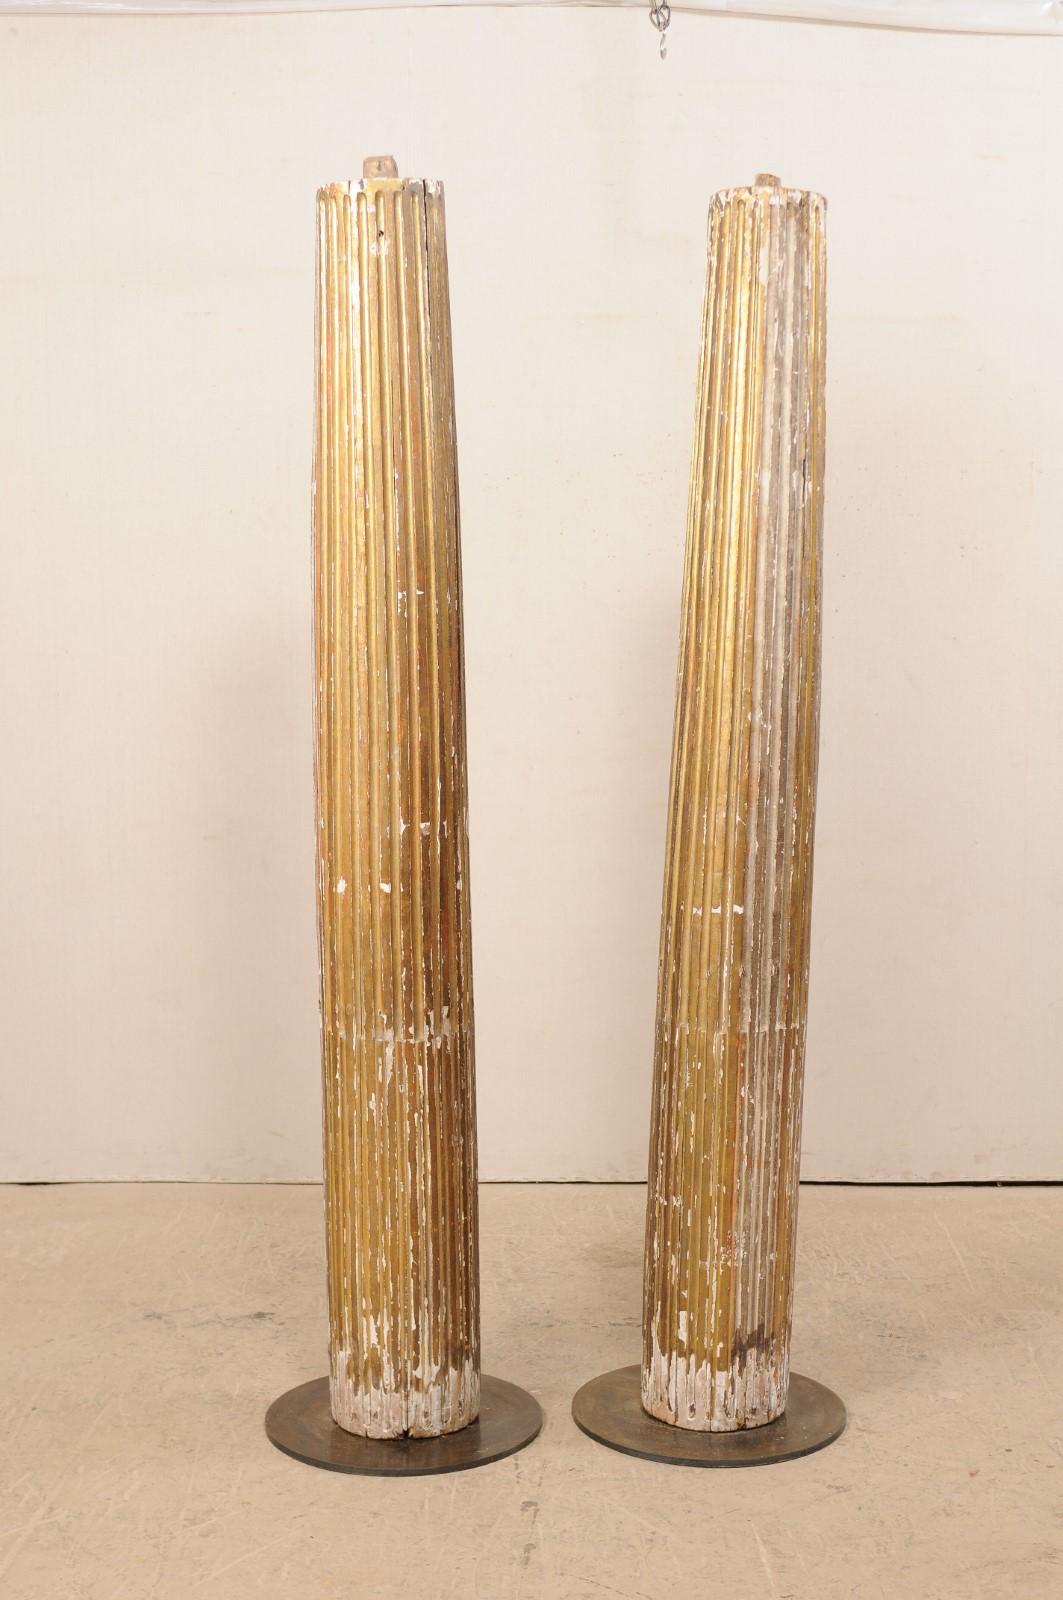 A pair of Italian fluted and giltwood columns from the 18th century. This antique pair of tall architectural columns from Italy feature fluted, and rounded bodies, tapering slightly towards their top, with a fabulous old chippy patina and gilt. Each